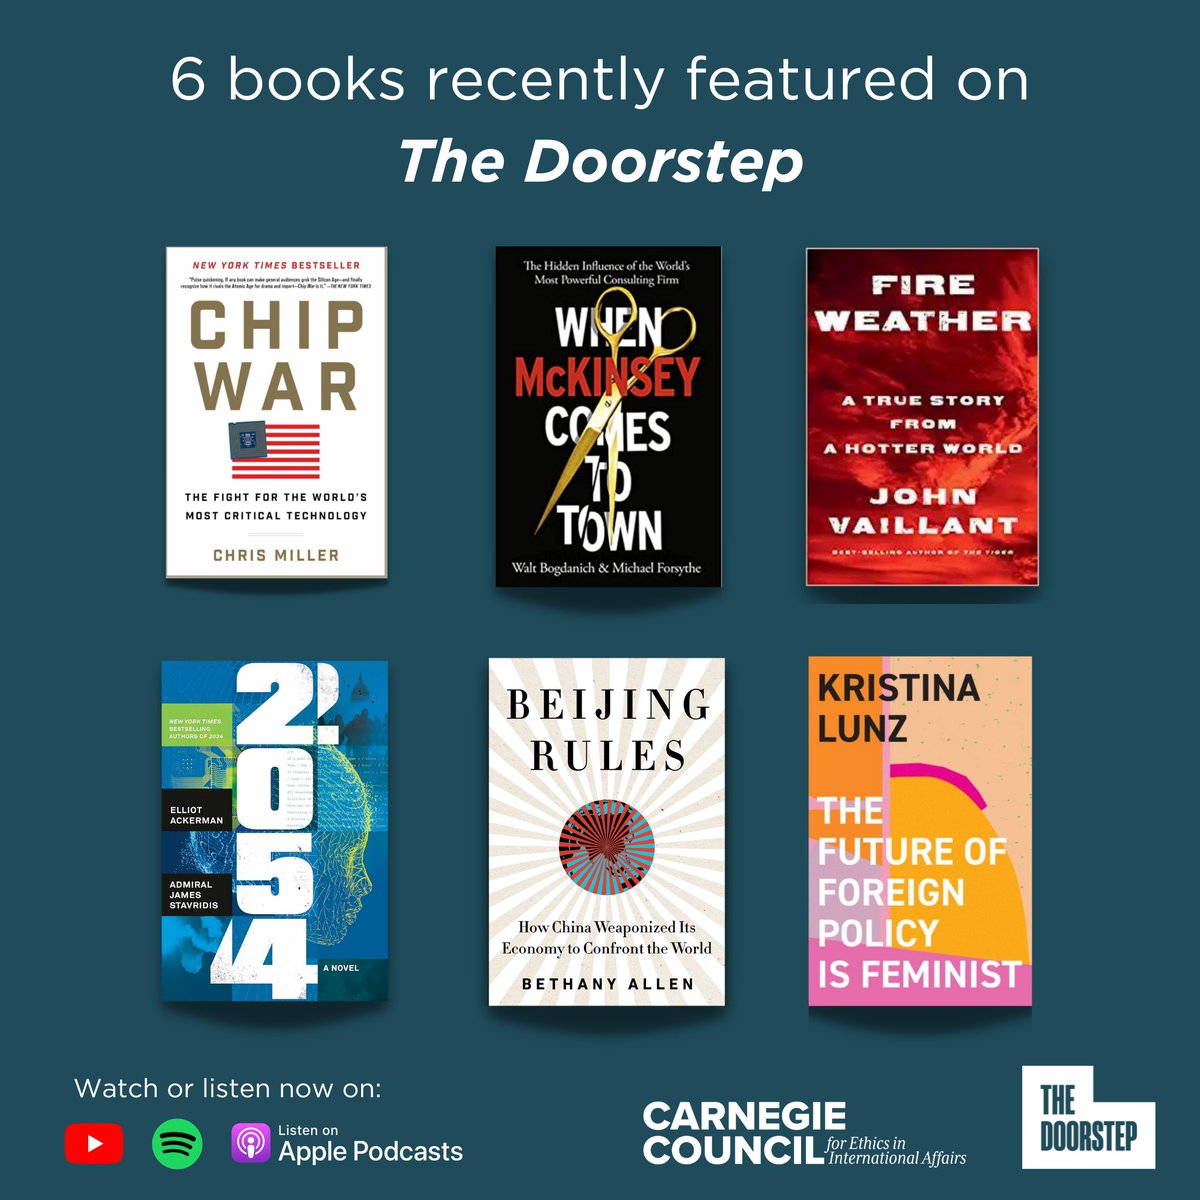 On #WorldBookDay, check out these 6 books featured on @DoorstepPodcast. Watch or listen to the discussions with authors @Crmiller1, @PekingMike & @WaltBogdanich, @JohnVaillant, @BethanyAllenEbr, @Kristina_Lunz, and @stavridisj & @elliotackerman here: carnegiecouncil.co/3UvUZl6